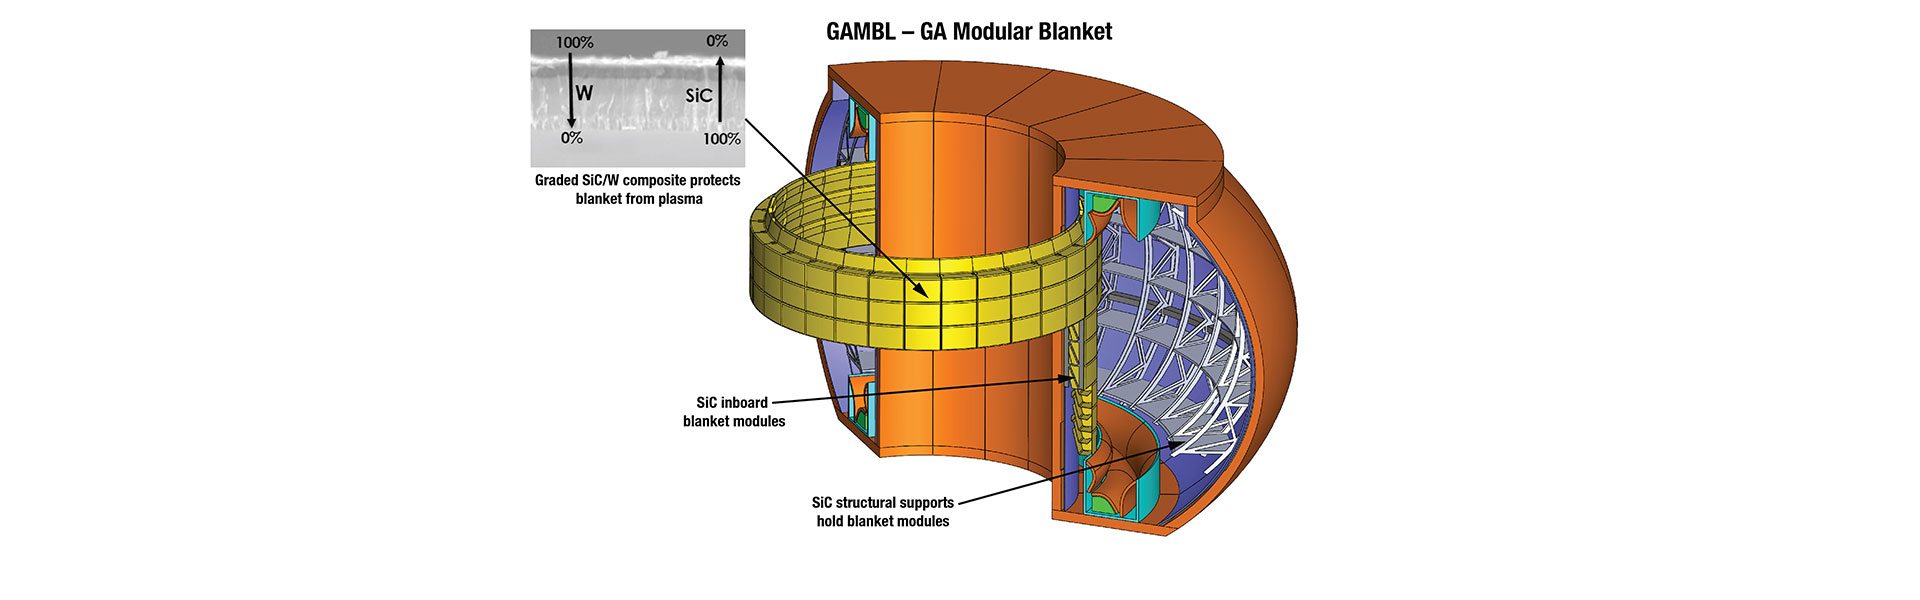 General Atomics Advances Fusion Technology with Silicon Carbide (SiC)–Based Materials